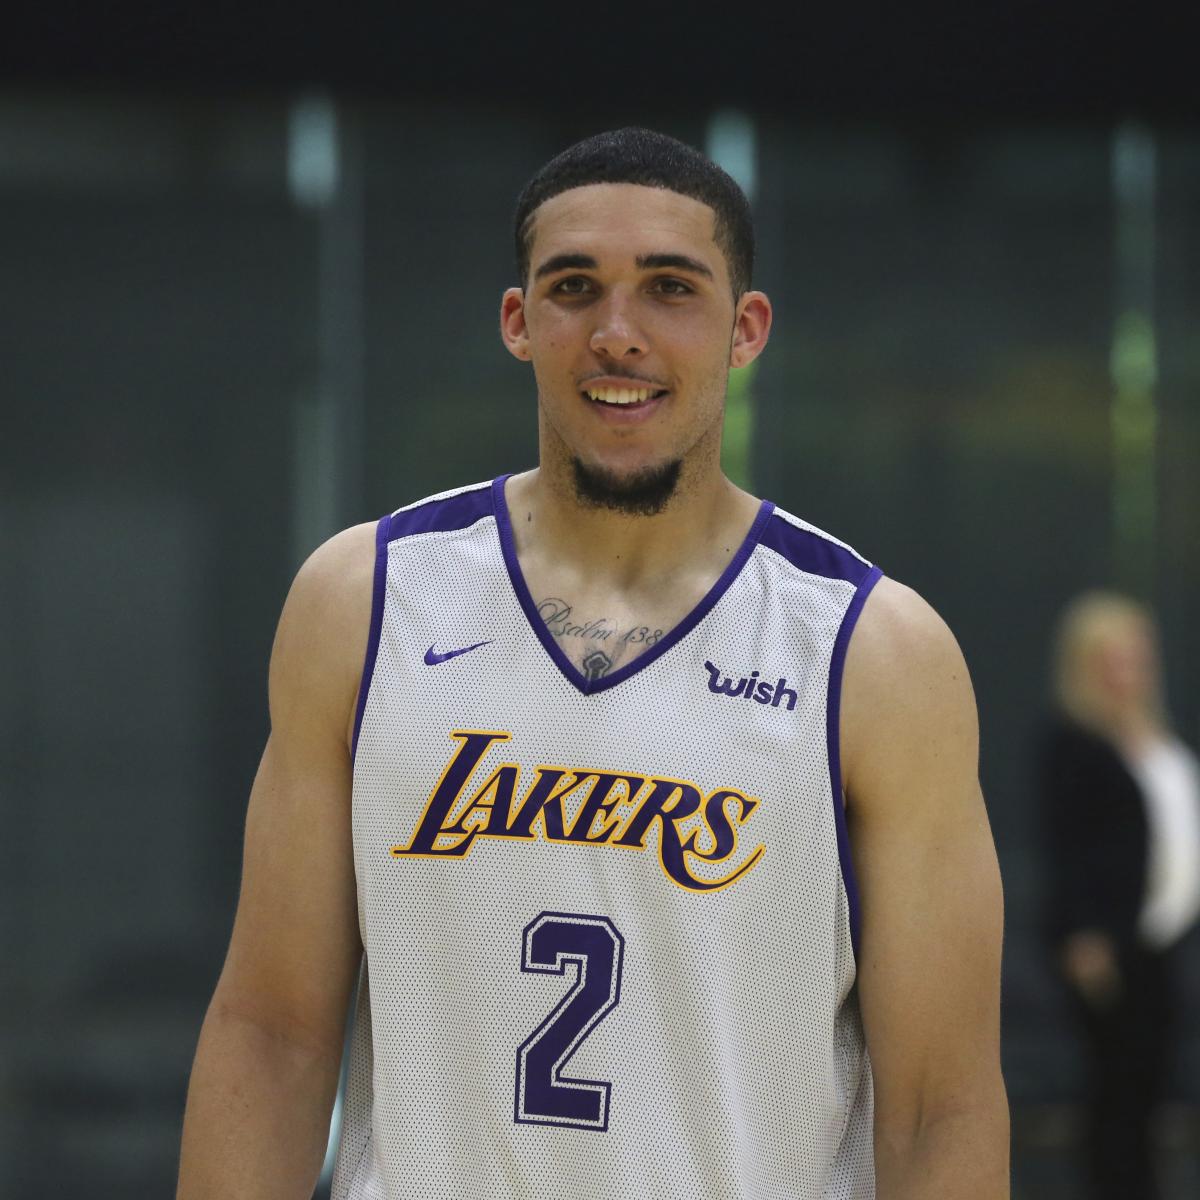 Will LiAngelo Ball make a return to the court, whether it be the